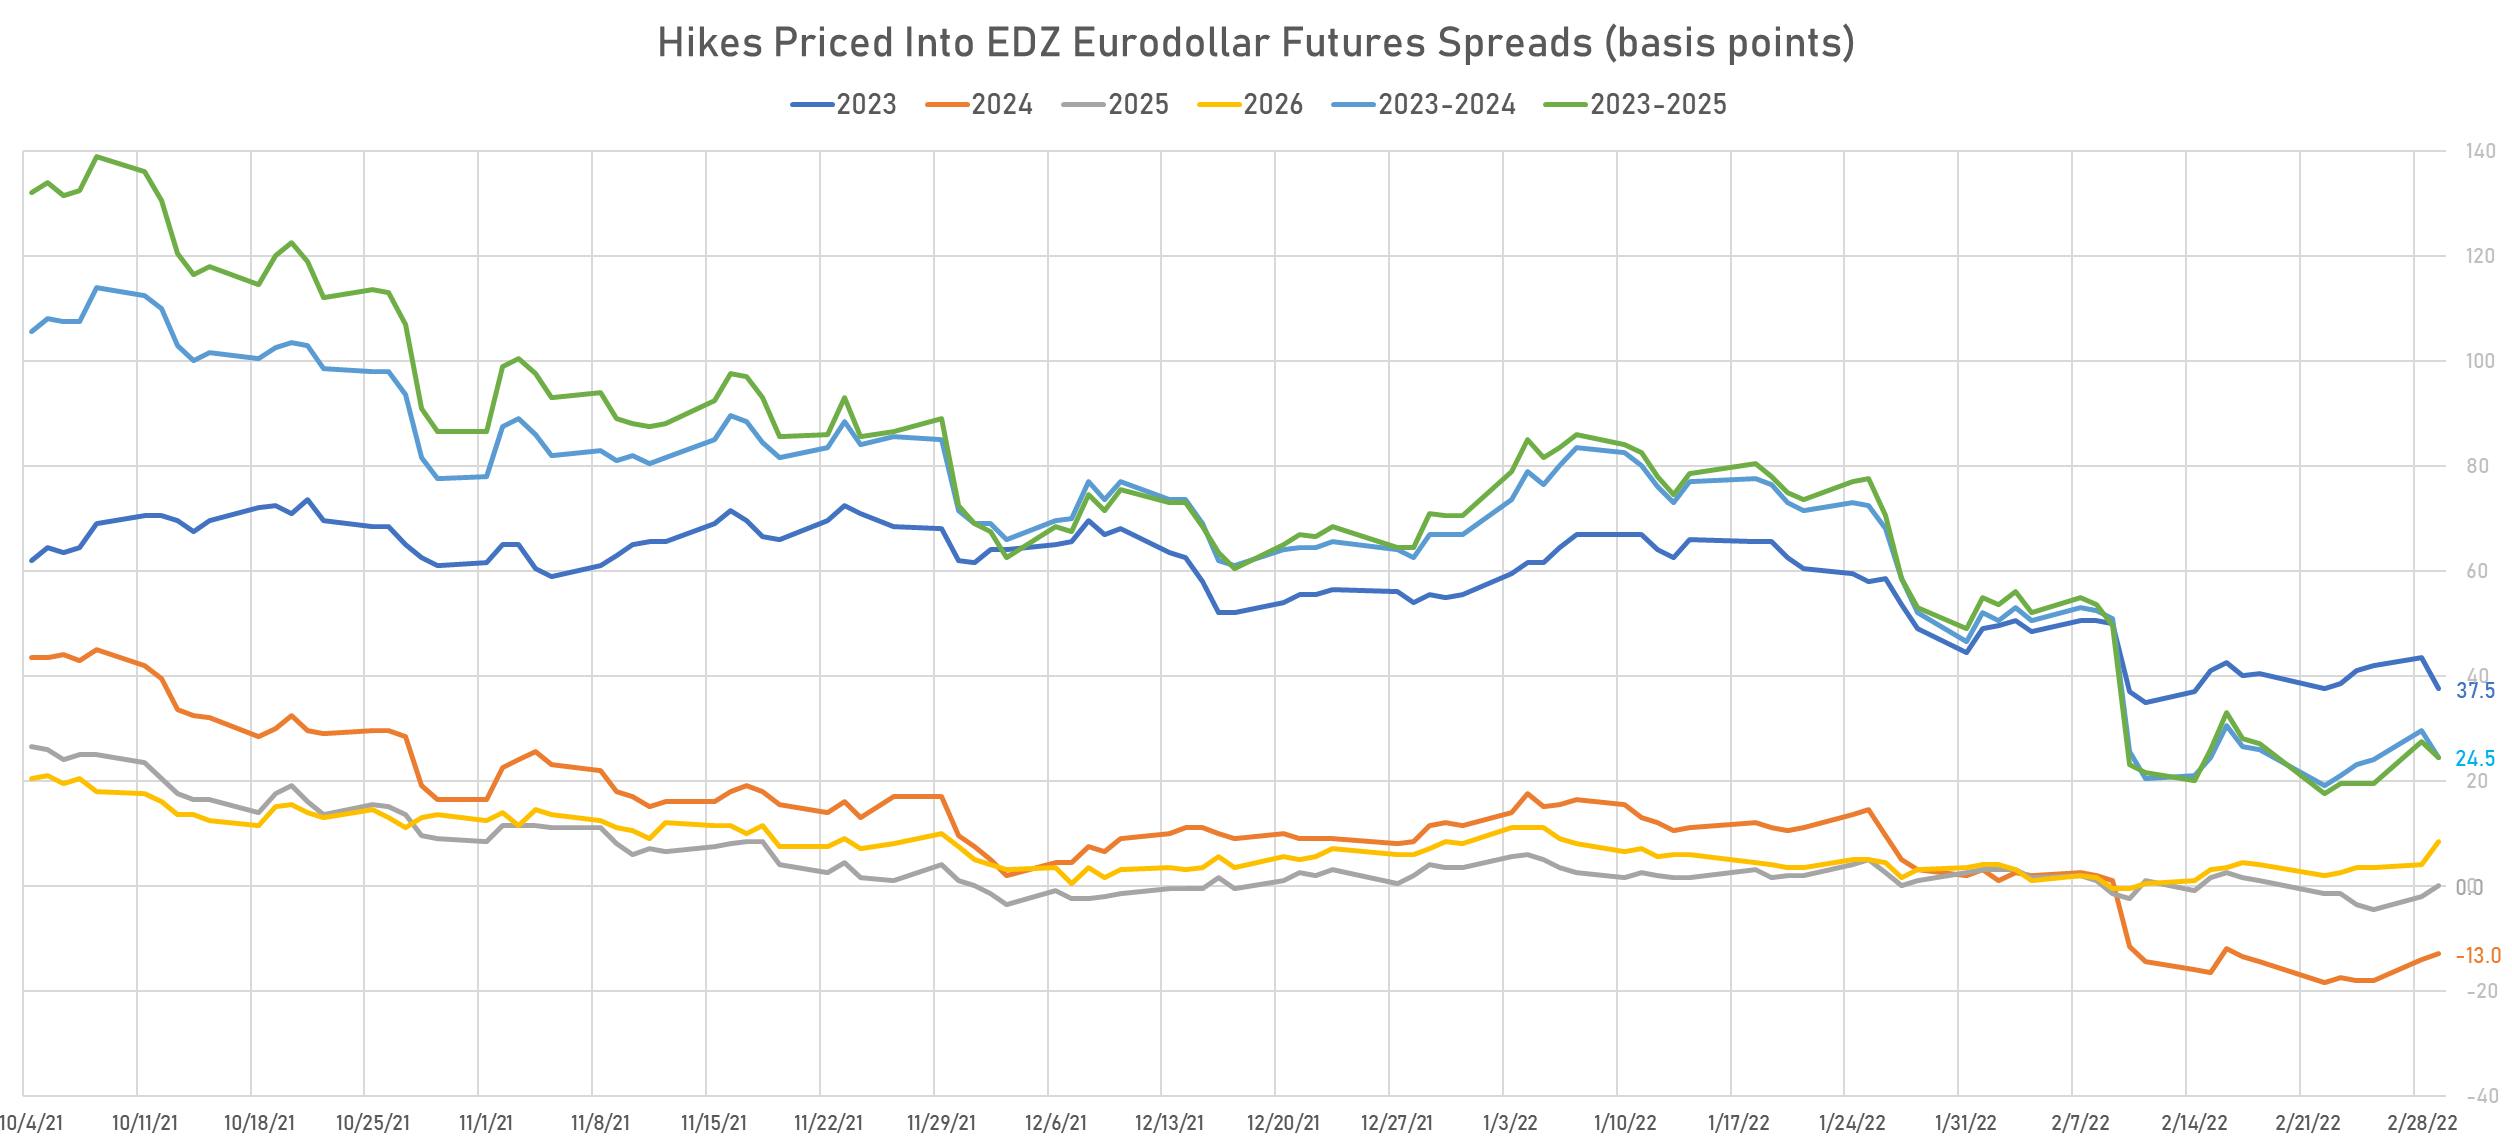 2023-2026 Fed Hikes Derived from Eurodollar futures | Sources: phipost.com, Refinitiv data